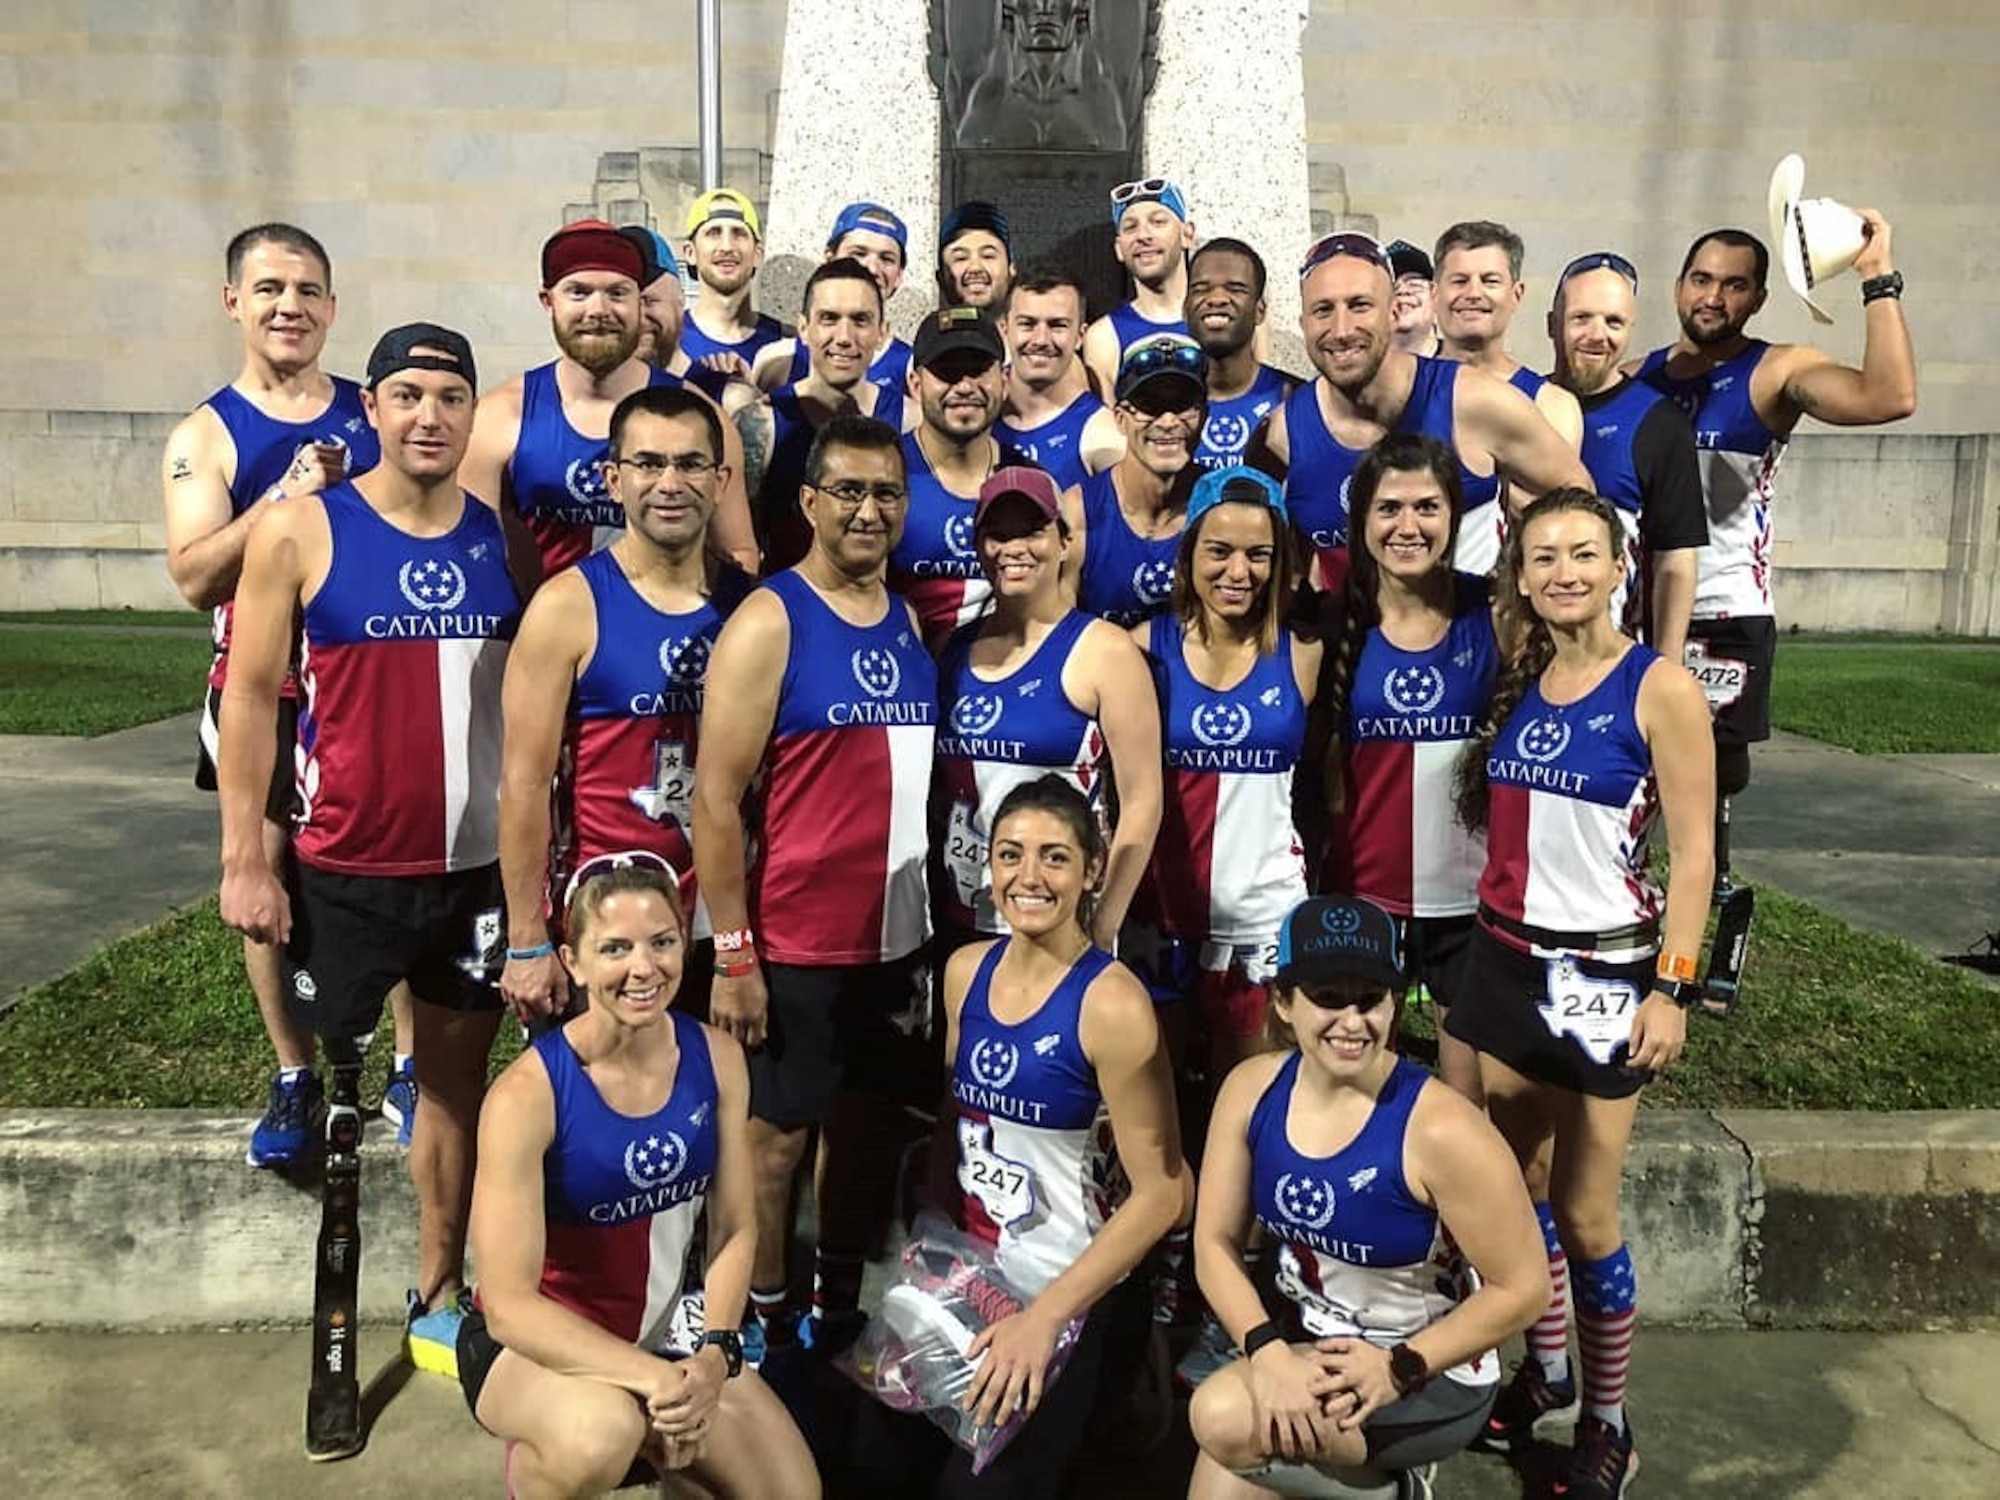 Staff Sgt. Stuart Martin, 68th Airlift Squadron loadmaster, with the CATAPULT group, after a 200-mile relay from Gonzales, Texas to downtown Houston, July 4, 2019. The CATAPULT group was founded in 2015 for a group of like-minded Houston-area triathletes and runners. After his recovery from his motorcycle accident, Martin participated in several marathons. (Courtesy photo)